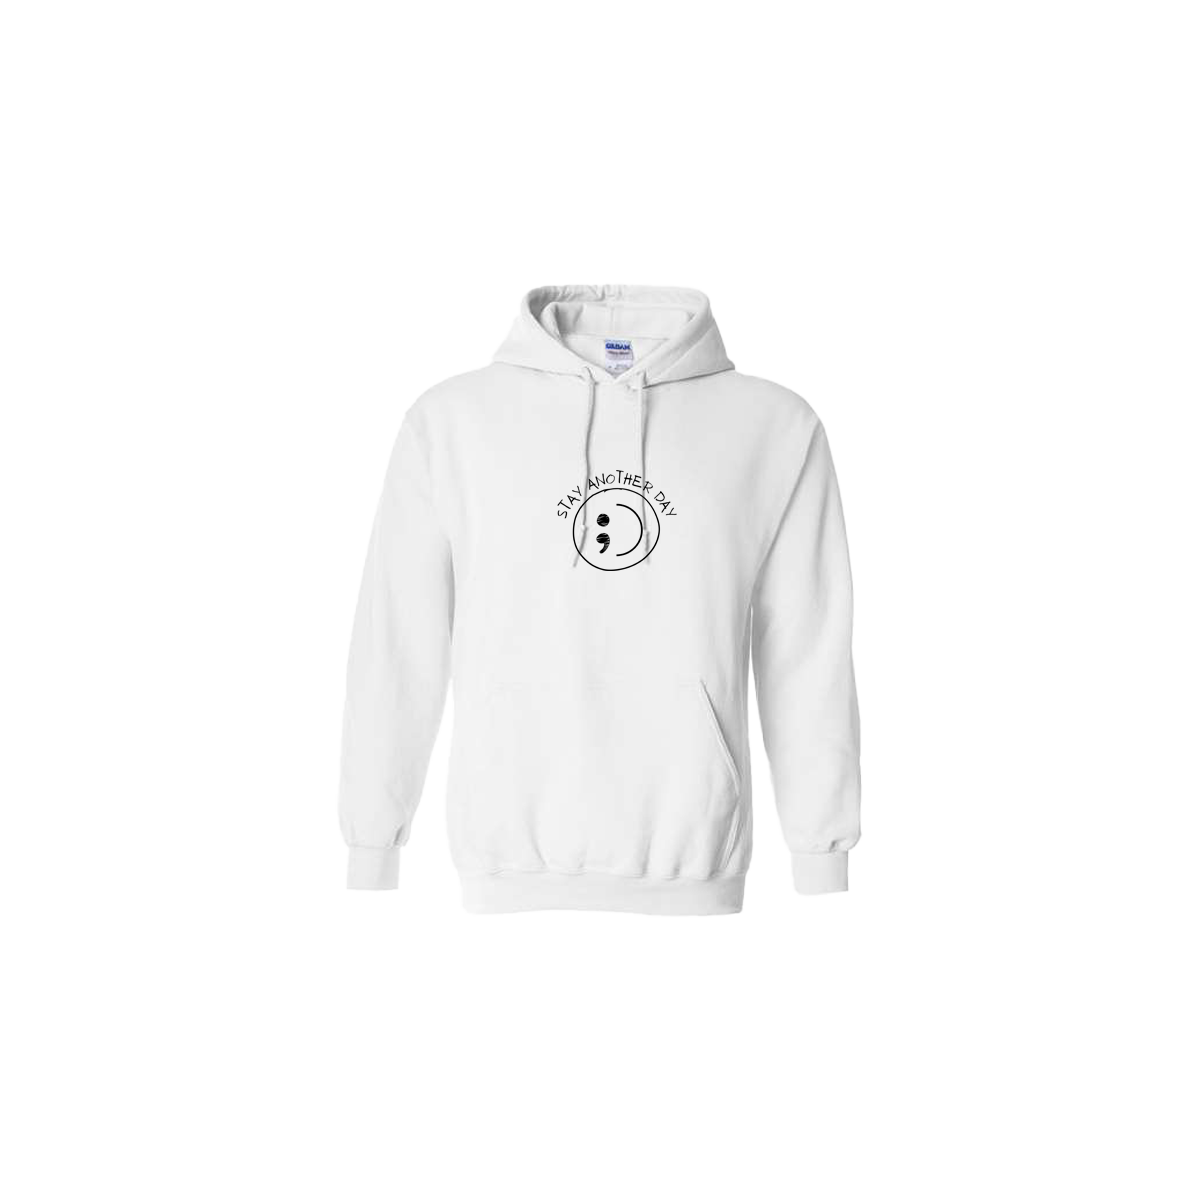 Stay Another Day Smiley Face Embroidered White Hoodie - Mental Health Awareness Clothing